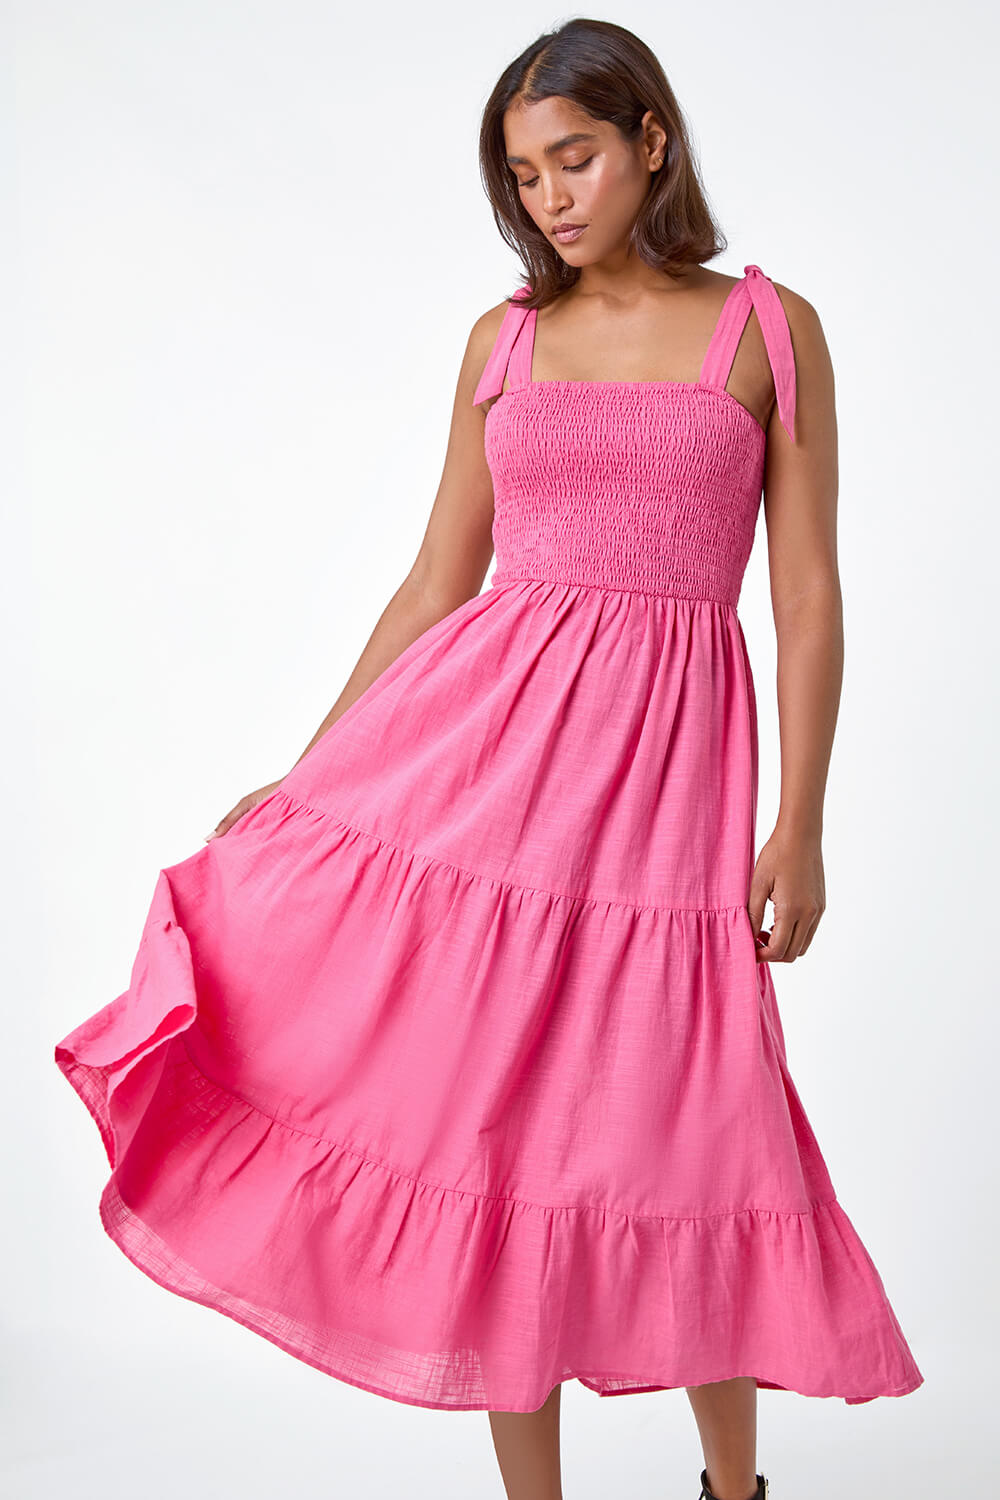 PINK Shirred Tie Cotton Tiered Midi Dress, Image 2 of 5